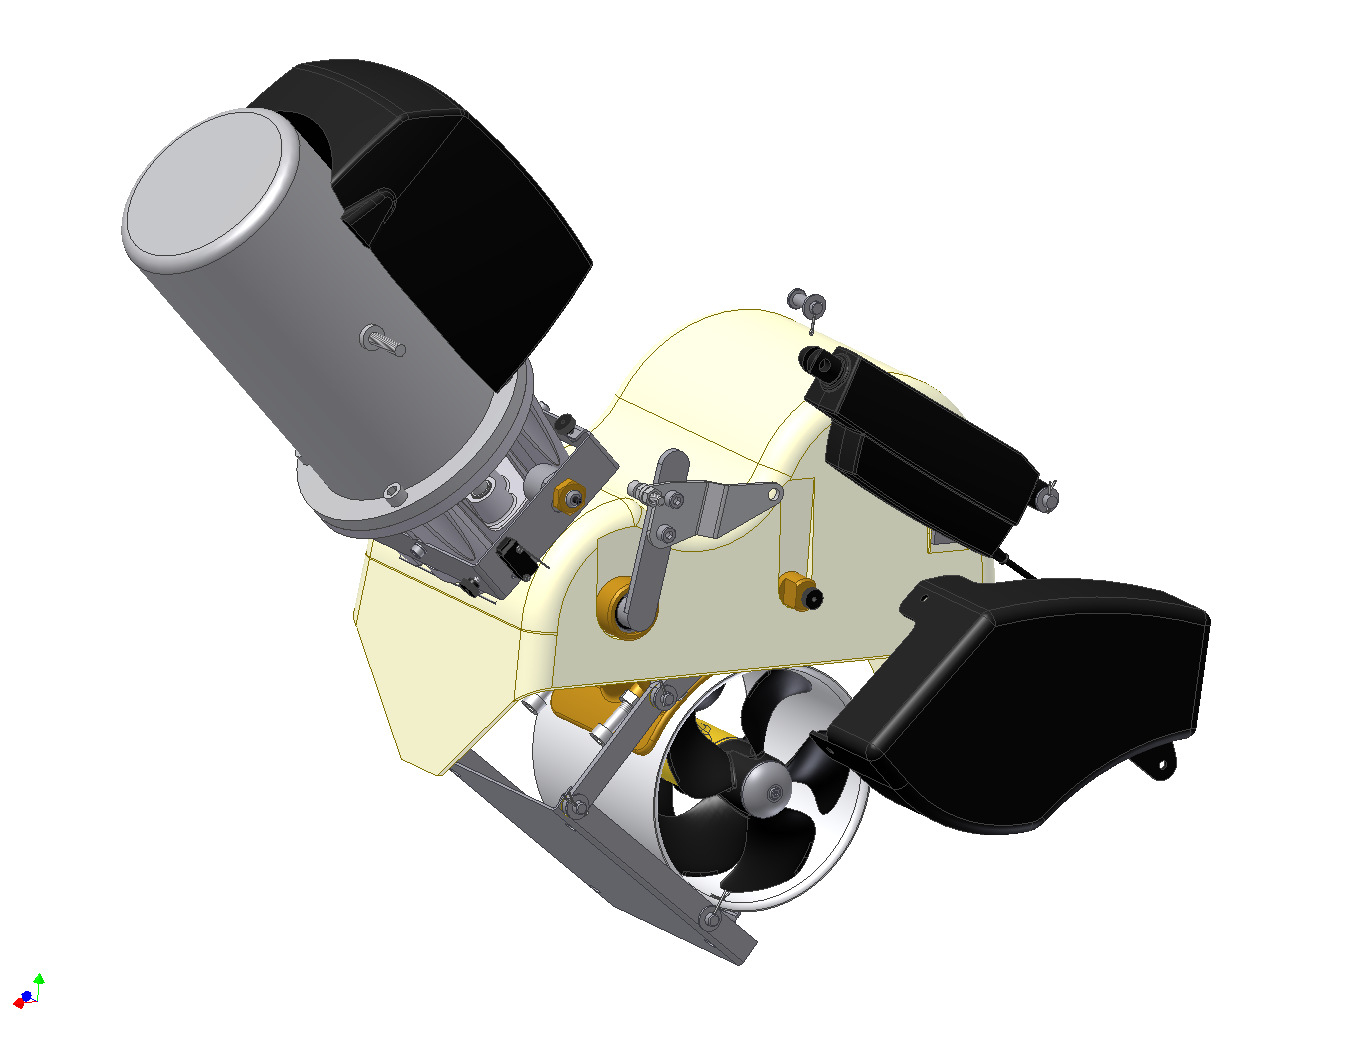 Loosen actuator from front mounting point and carefully swing the retracting unit out of hull (people outside hull recommended to control moving part of thruster) Mount the hatch to the retract